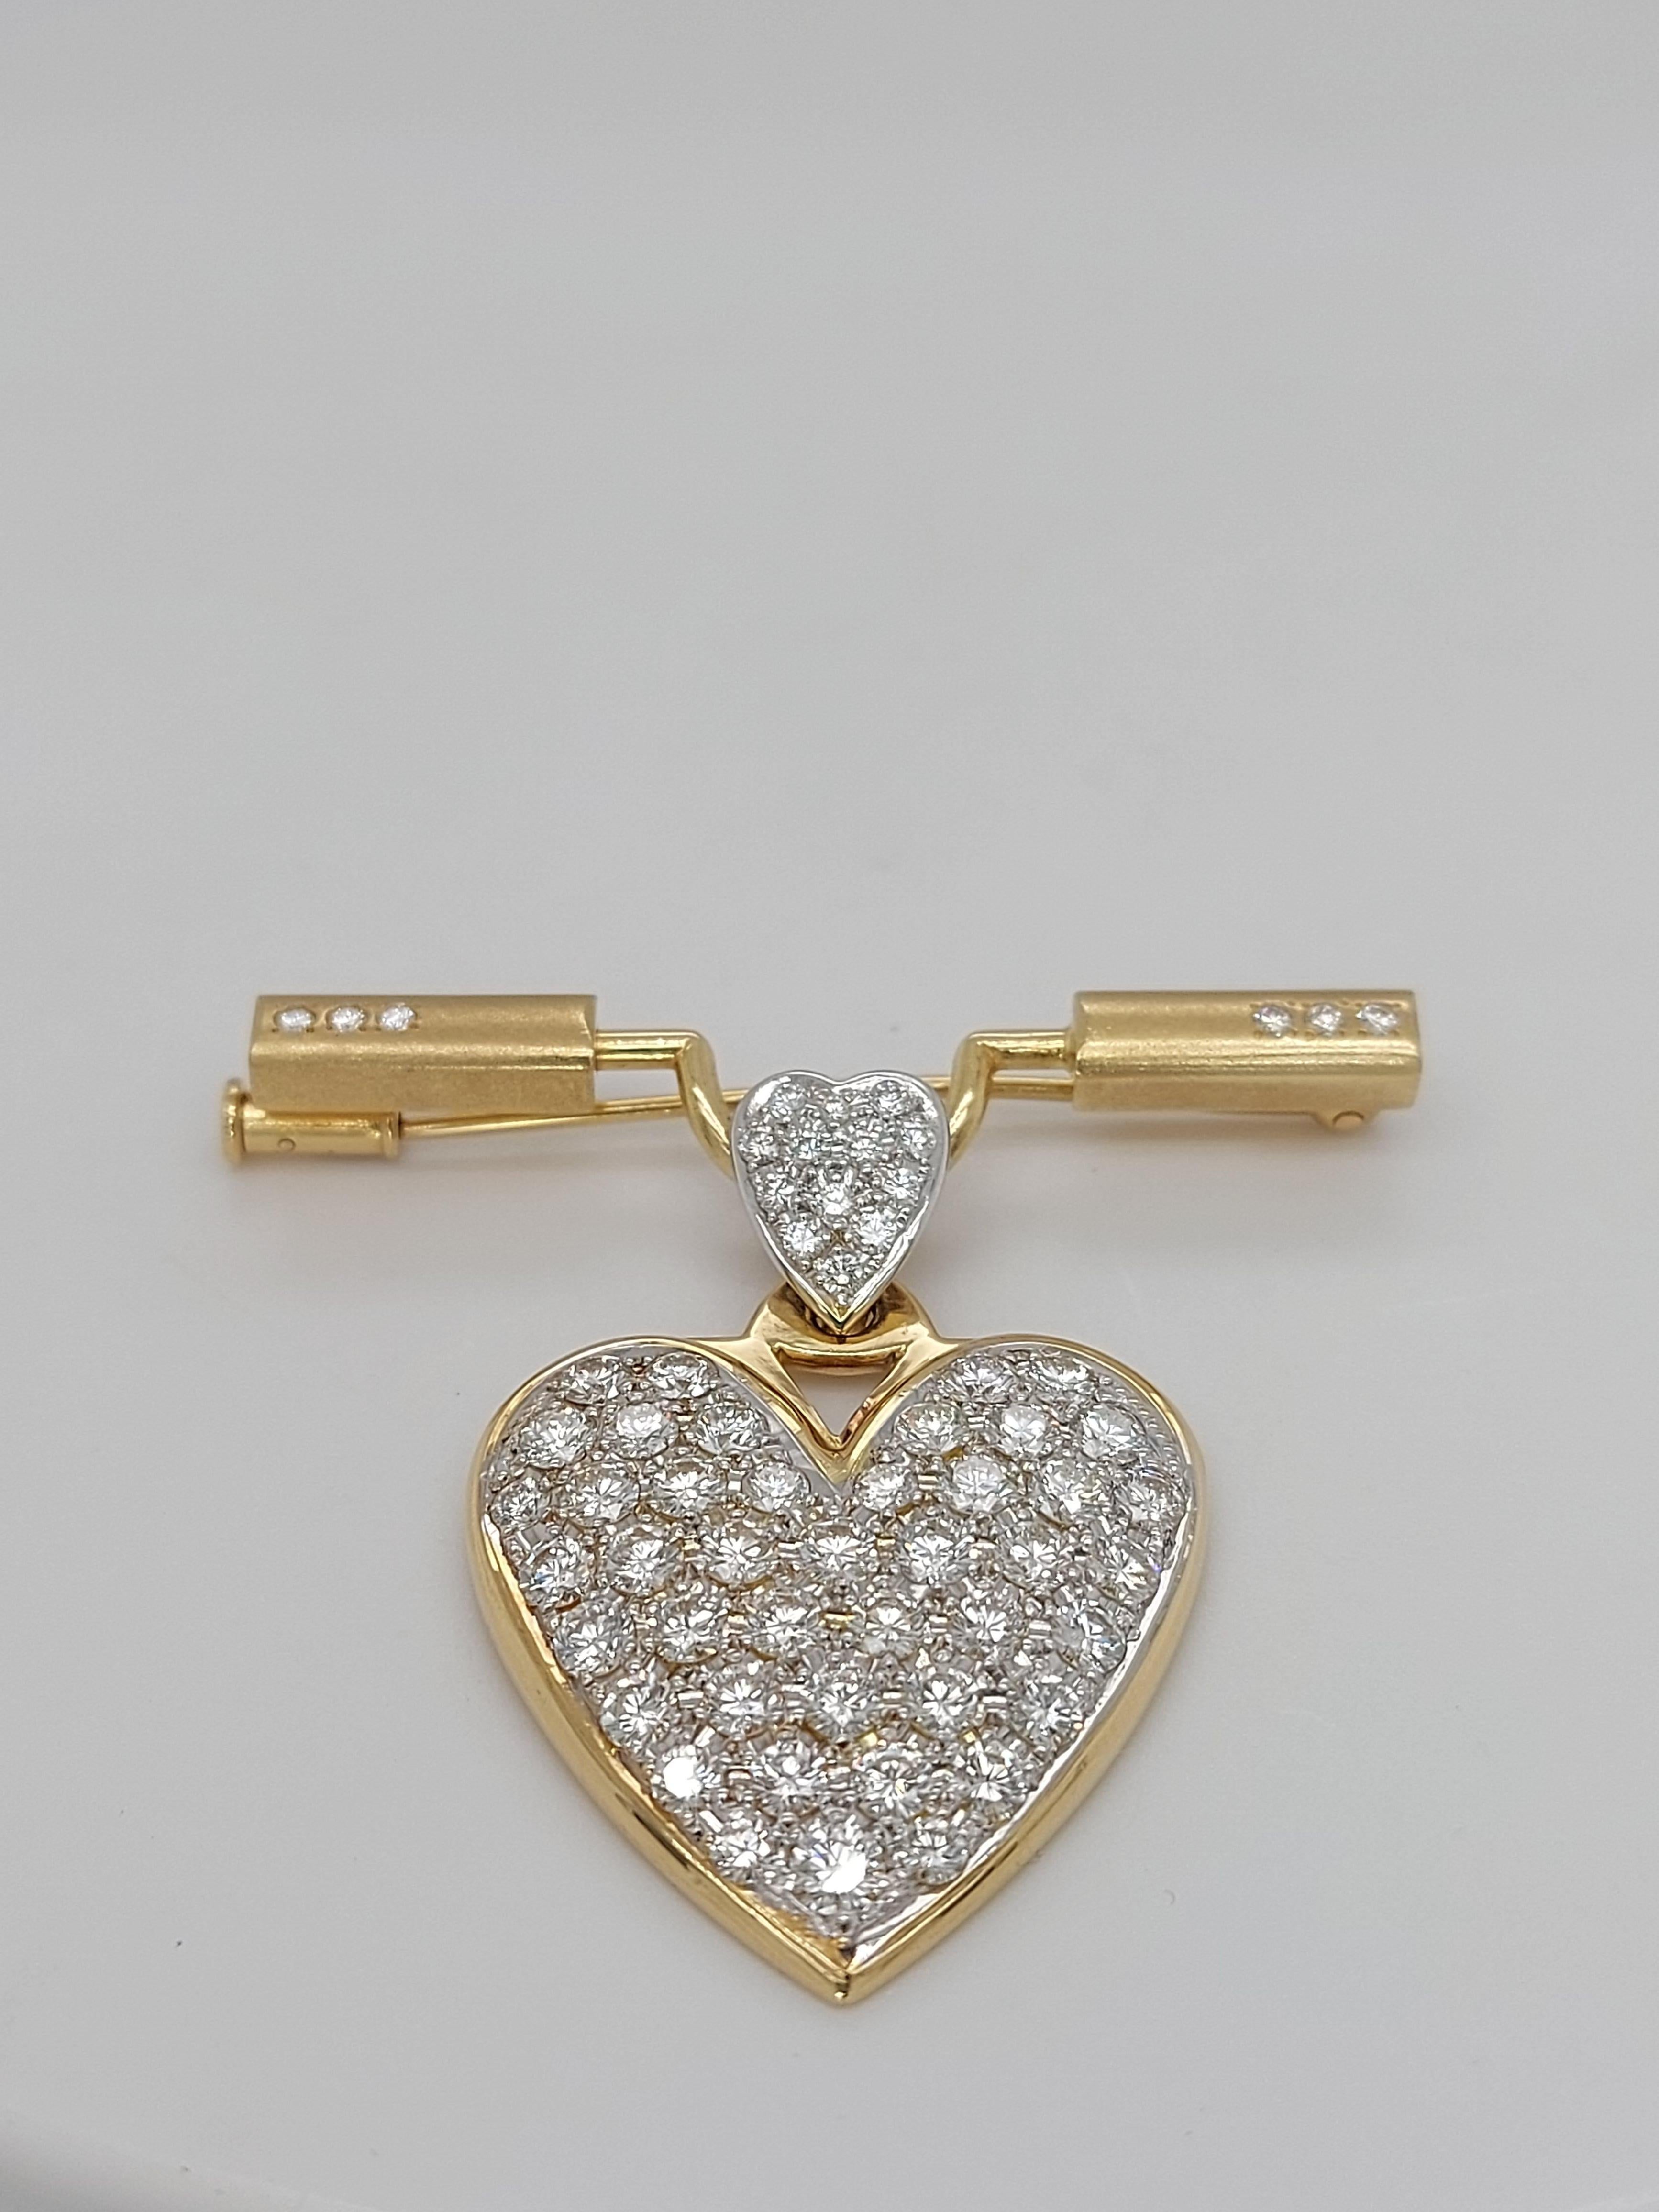 Yellow Gold Brooch with Diamond Heart Pavé Set Diamonds Dangling Down For Sale 2